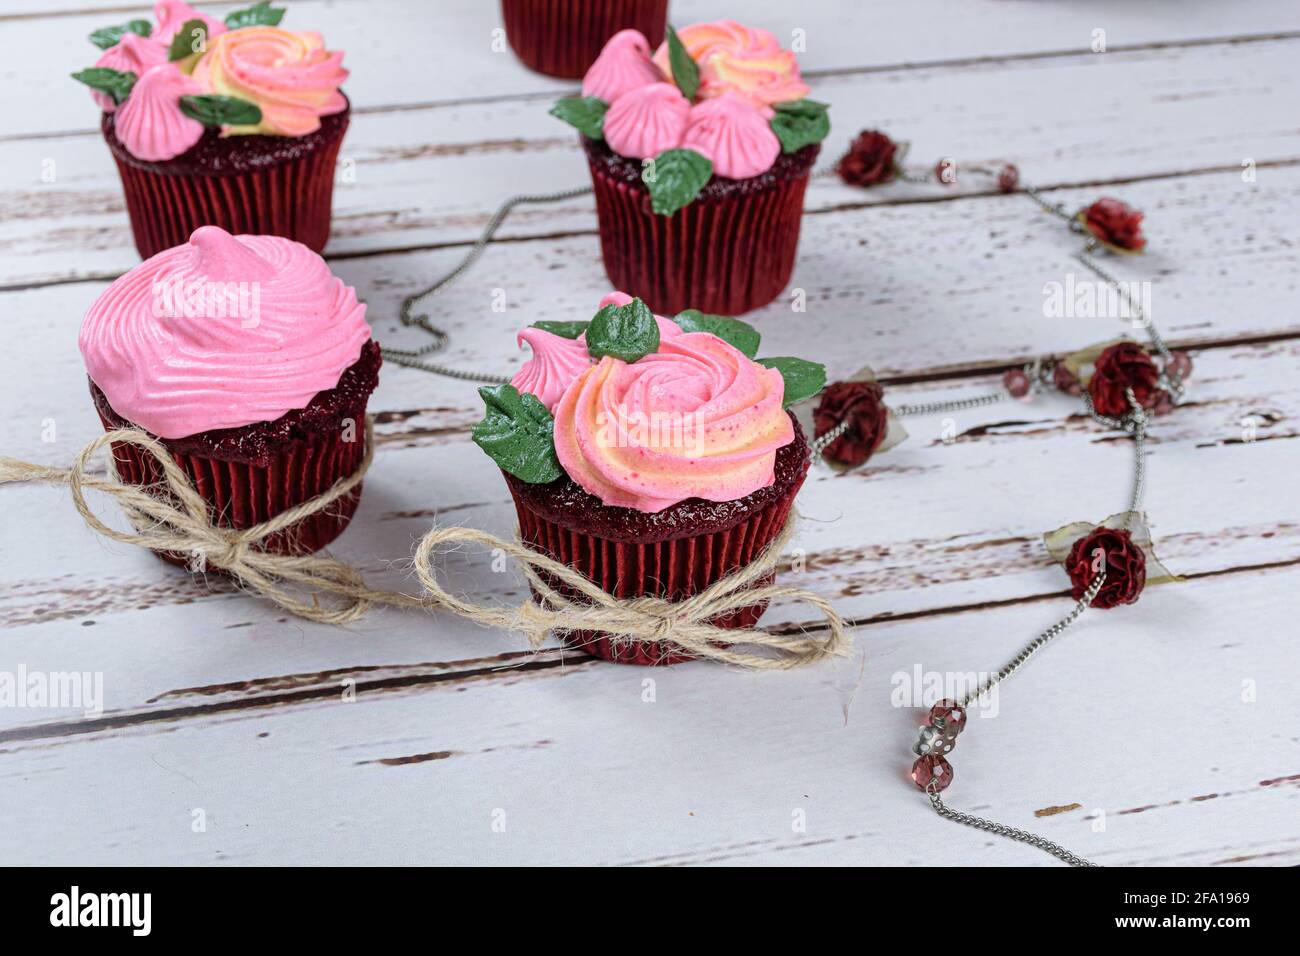 Closeup of red velvet cupcakes decorated with sisal thread bow, next to a female necklace with small roses. Stock Photo